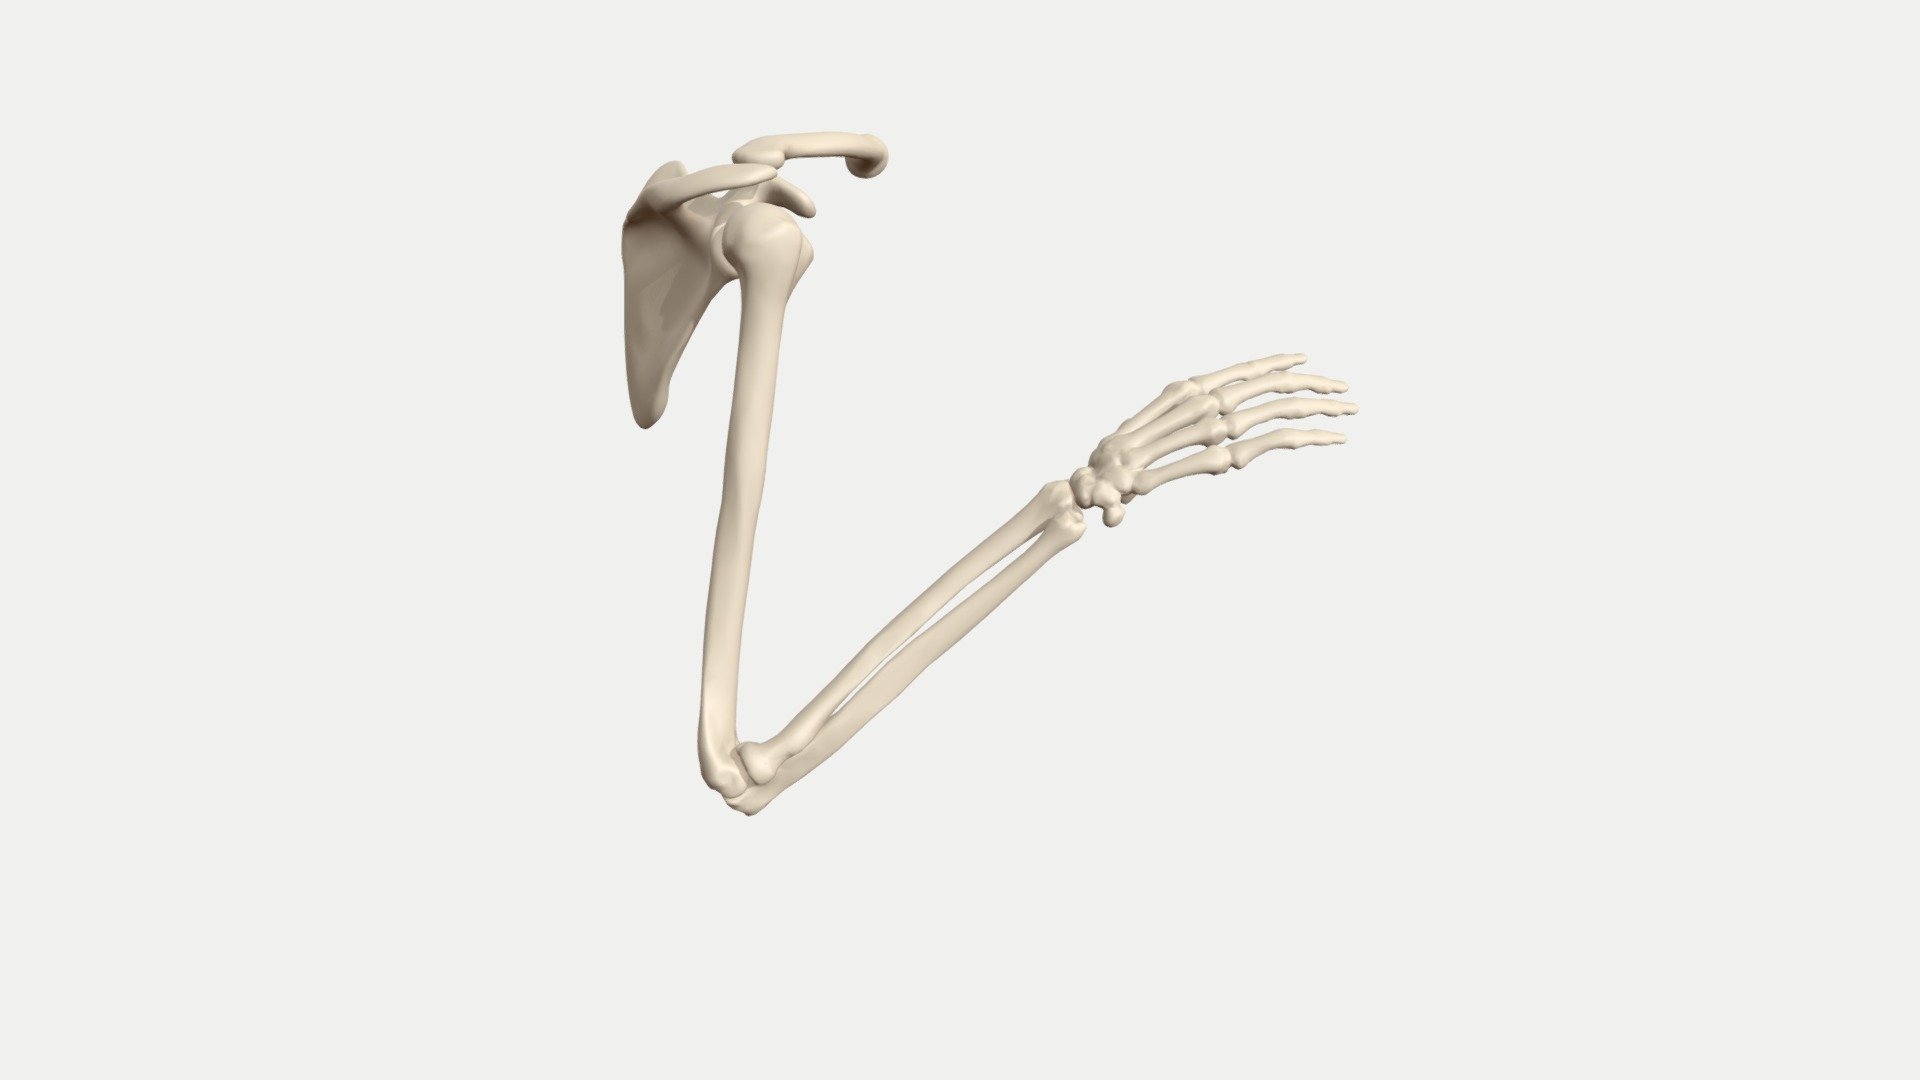 This is an animation of the arm bones: humerus, ulna and radius showing how the elbow joint works during pronation/supination with along with flexion and extension.

I made it as part of a series of blog posts I’m working on to describe anatomy for artists which you can find here:
https://pearsetoomey.com/bones-of-the-arm/ - Pronation/supination - arm bones animated - 3D model by pearsetoomey 3d model